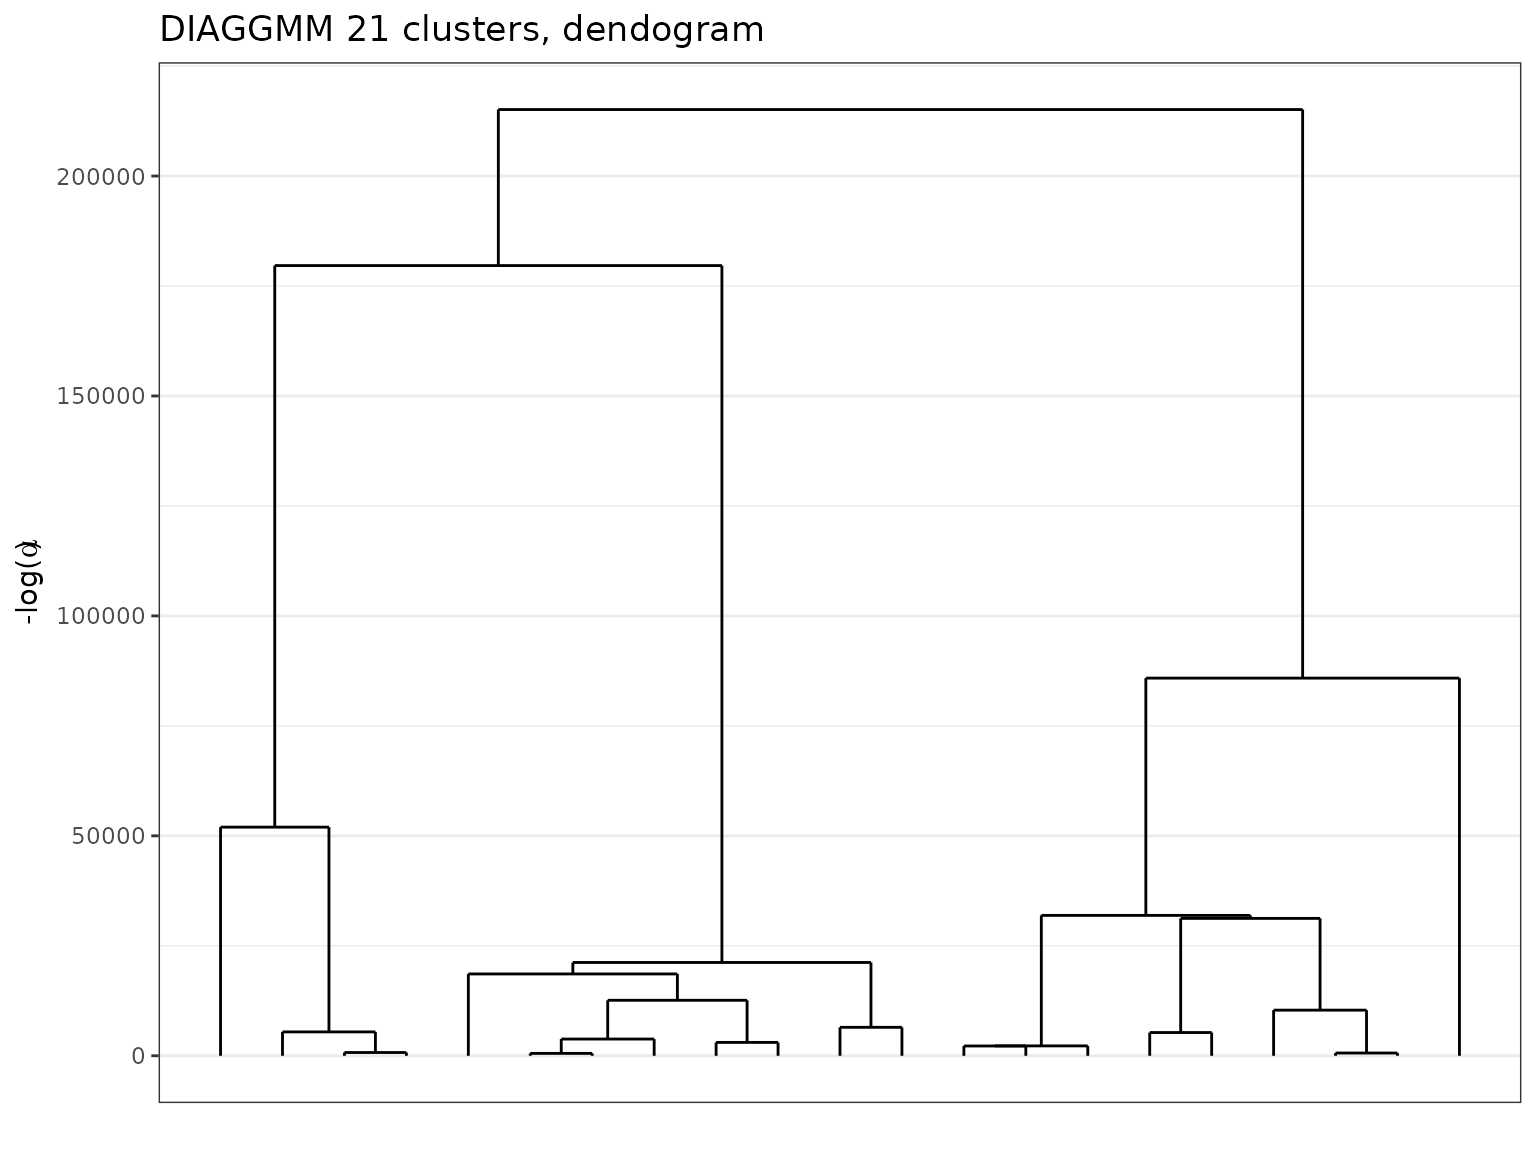 Dendogram extracted with a DiagGmm model on the fashionMNIST data.